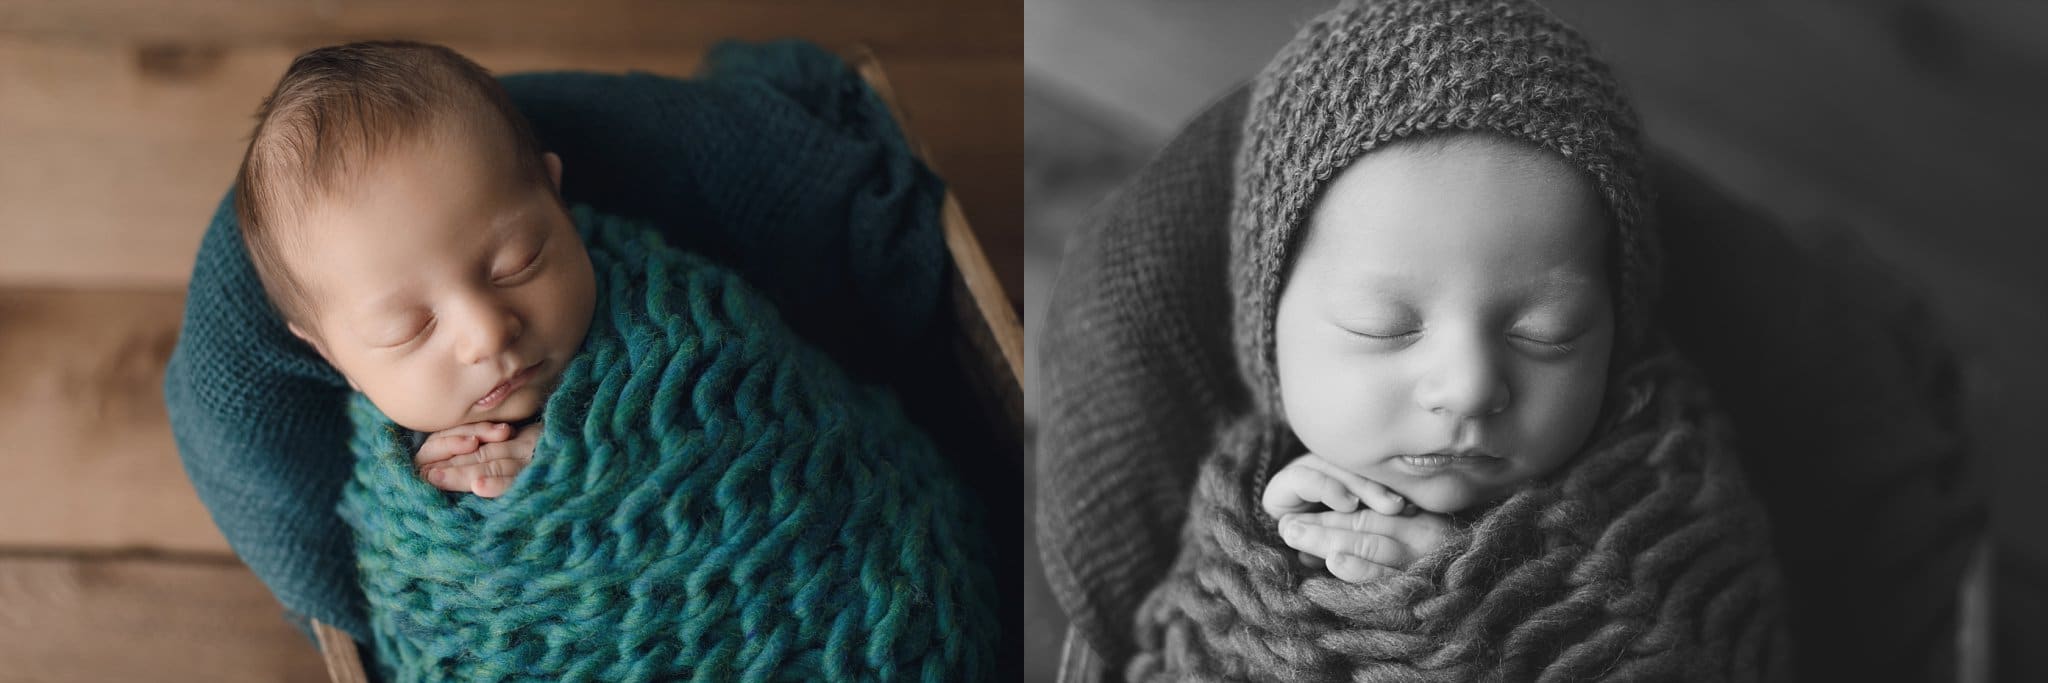 baby photography newborn baby boy swaddled in green and wearing green bonnet